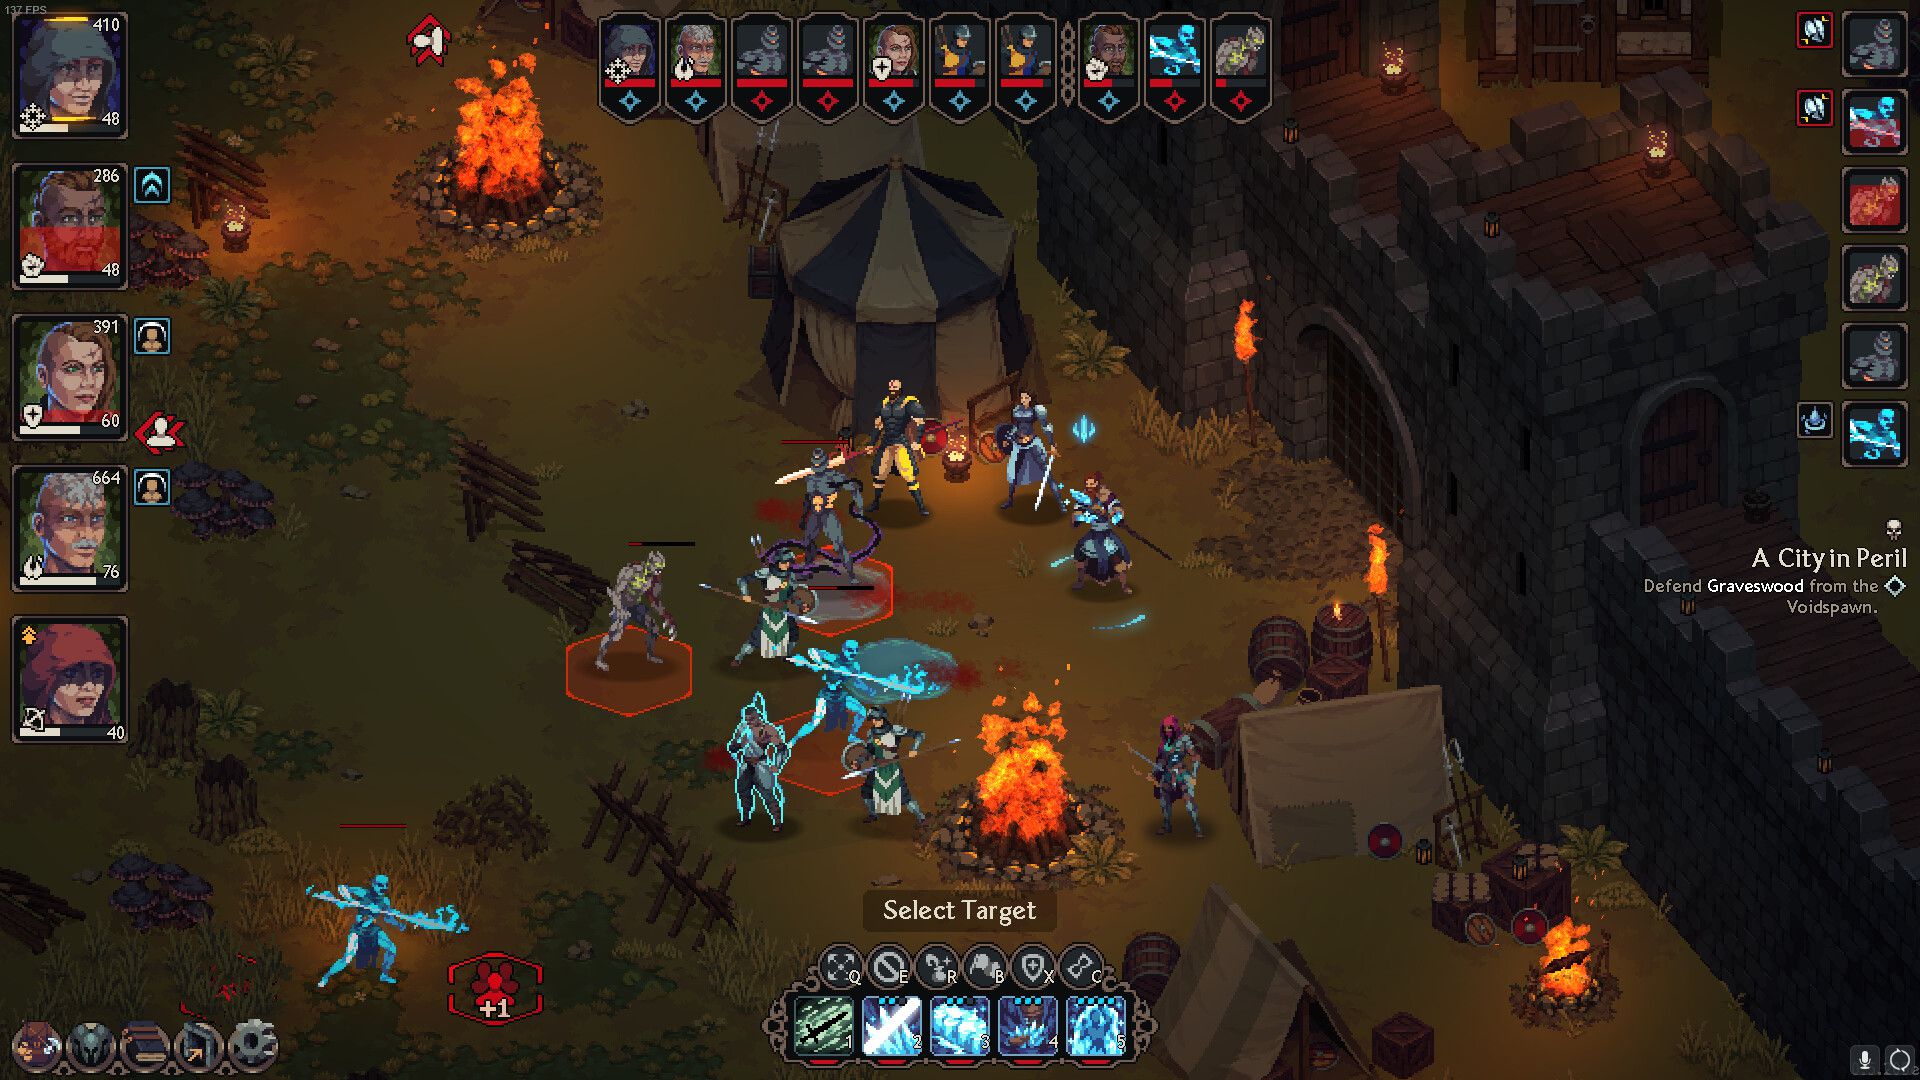 Image: The heroes fight back against spectral blue wraiths in an underground cavern, with spurts of magma surrounding the battle, in The Iron Oath.